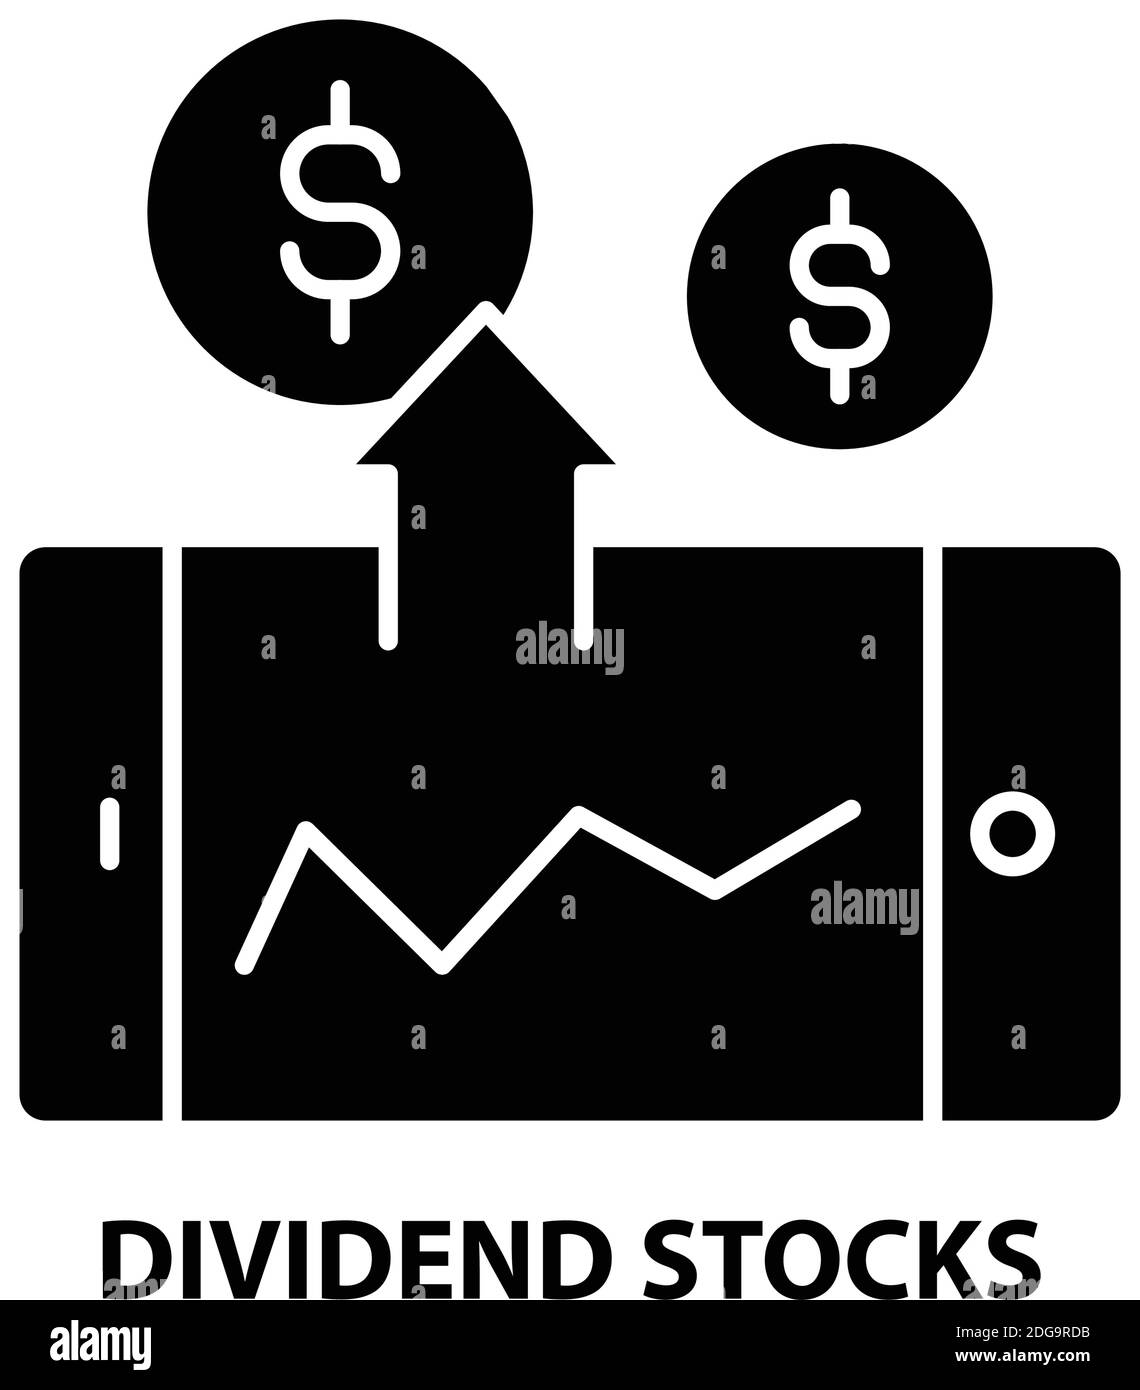 dividend stocks icon, black vector sign with editable strokes, concept illustration Stock Vector